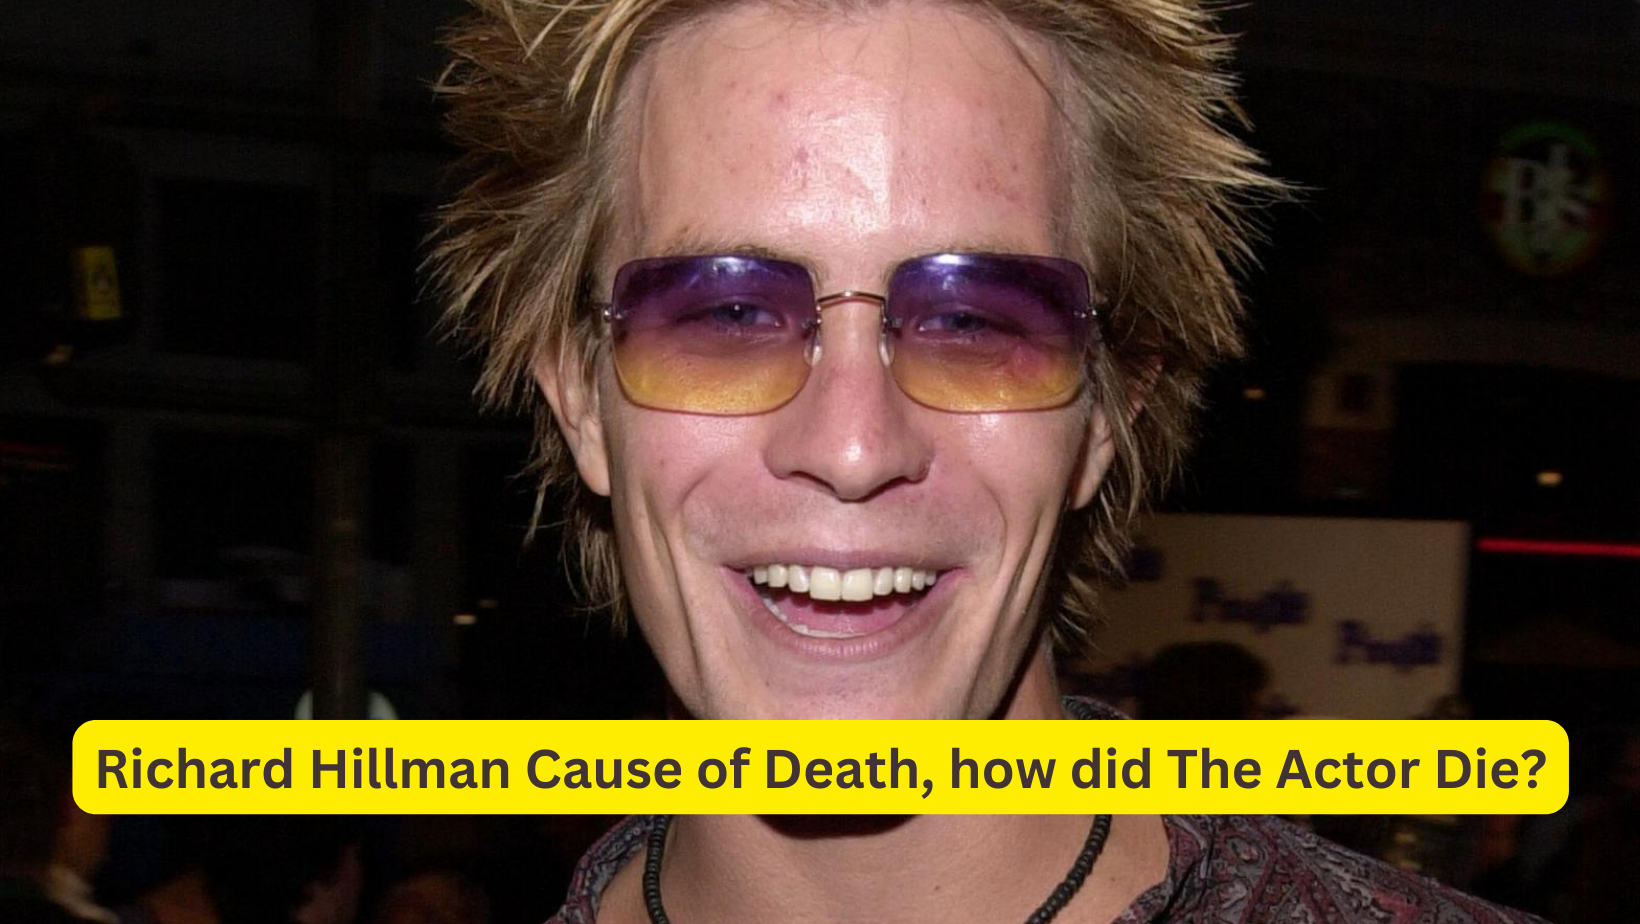 Richard Hillman Cause of Death, how did The Actor Die?